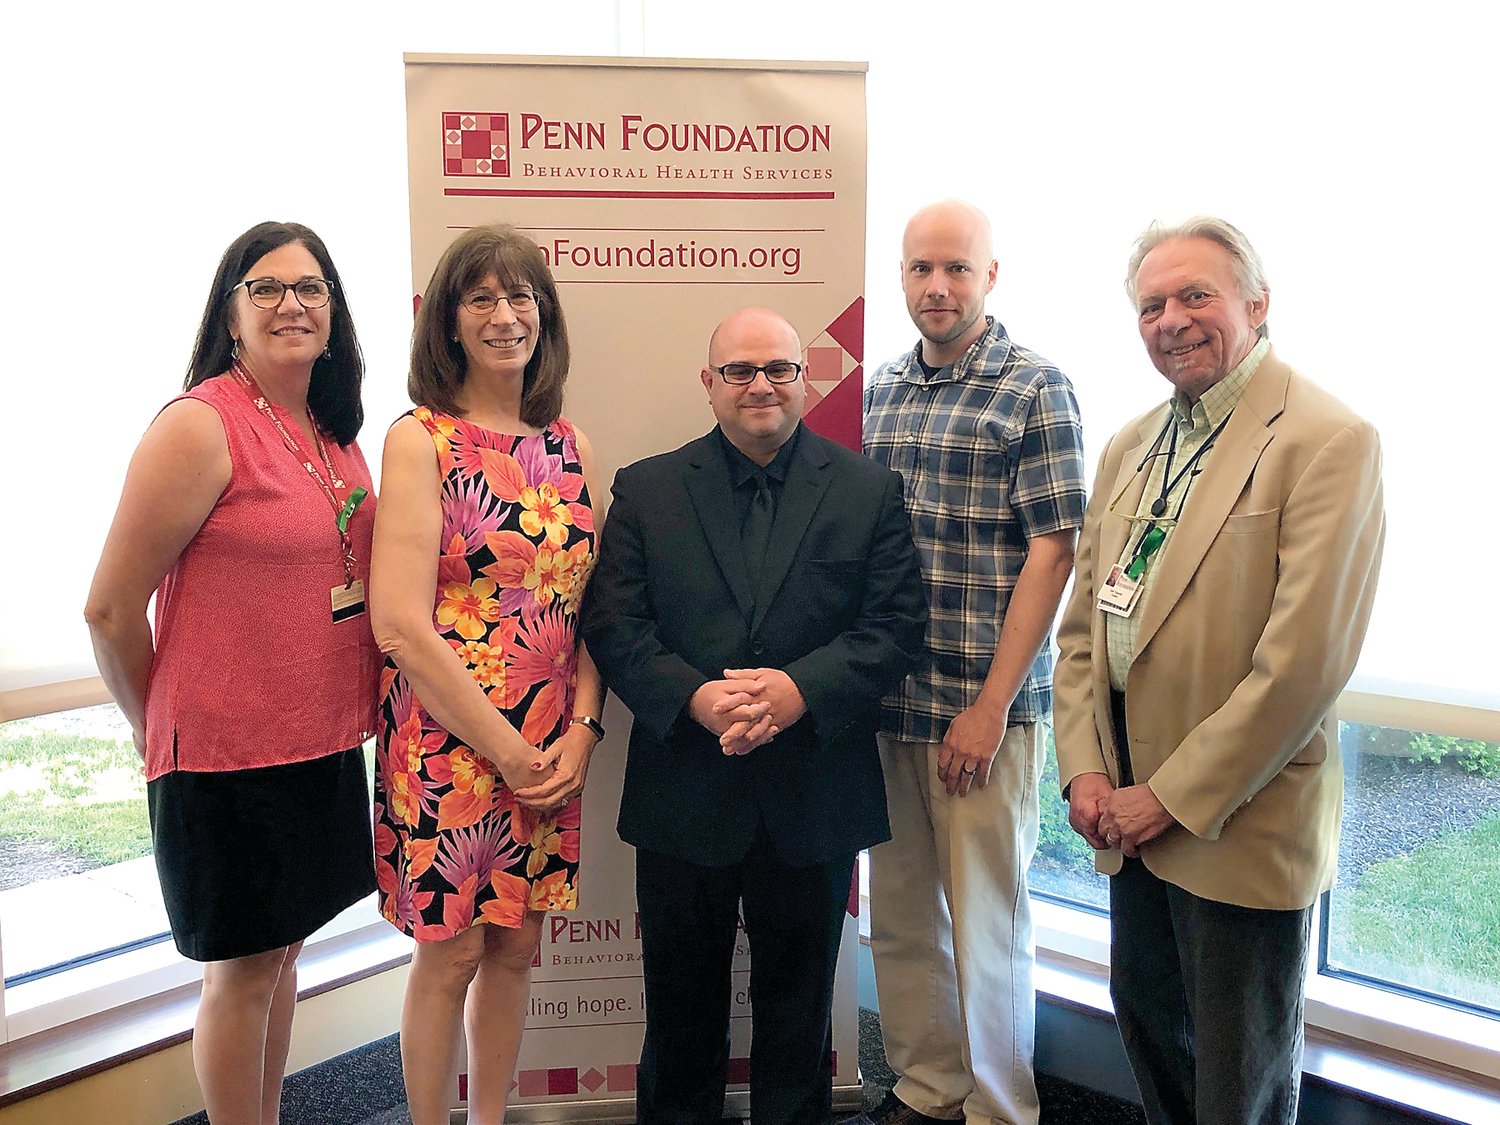 From left are presenters Nina Drinnan, nurse practitioner; Debra Ryan, director of community outreach (who organized the clergy education event); Ryan Stever, Penn Foundation client; Chad Wisler, wrap around mobile therapist; and the Rev. Carl Yusavitz, PhD, director of pastoral services.